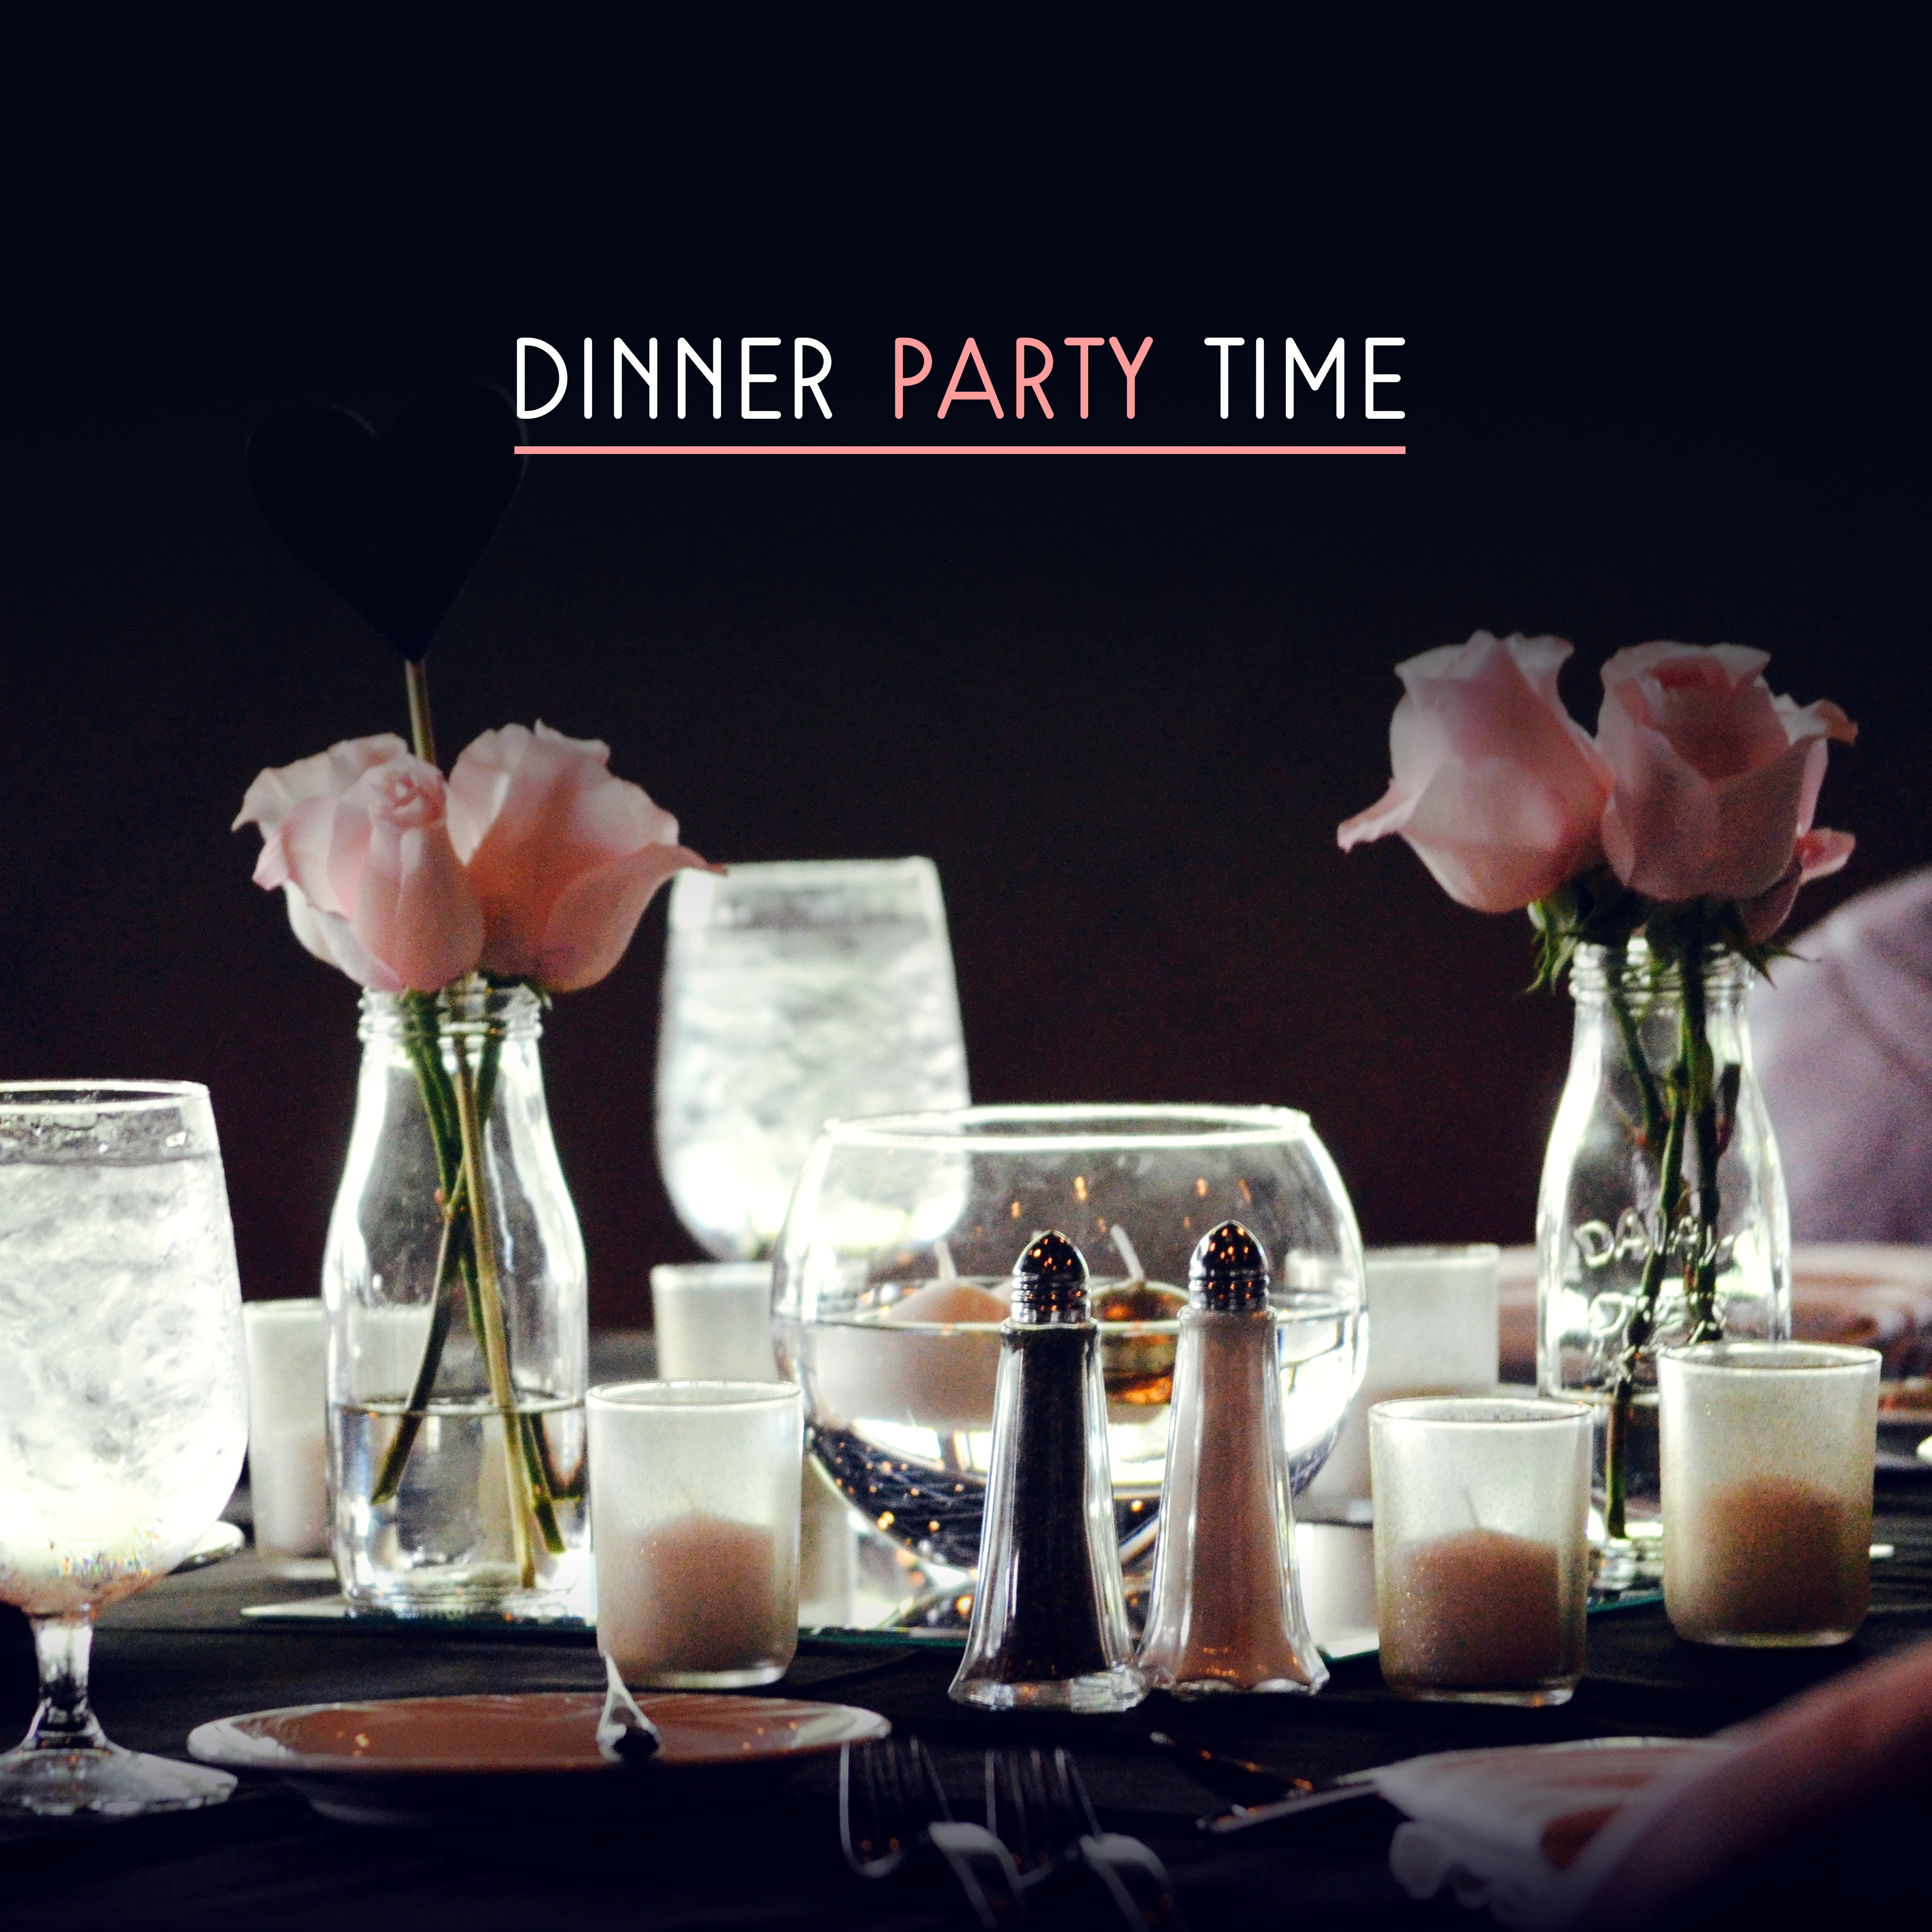 Dinner Party Time – Cafe Bar, Best Jazz for Restaurant, Mellow Jazz Cafe, Piano Bar, Relaxing Jazz After Work